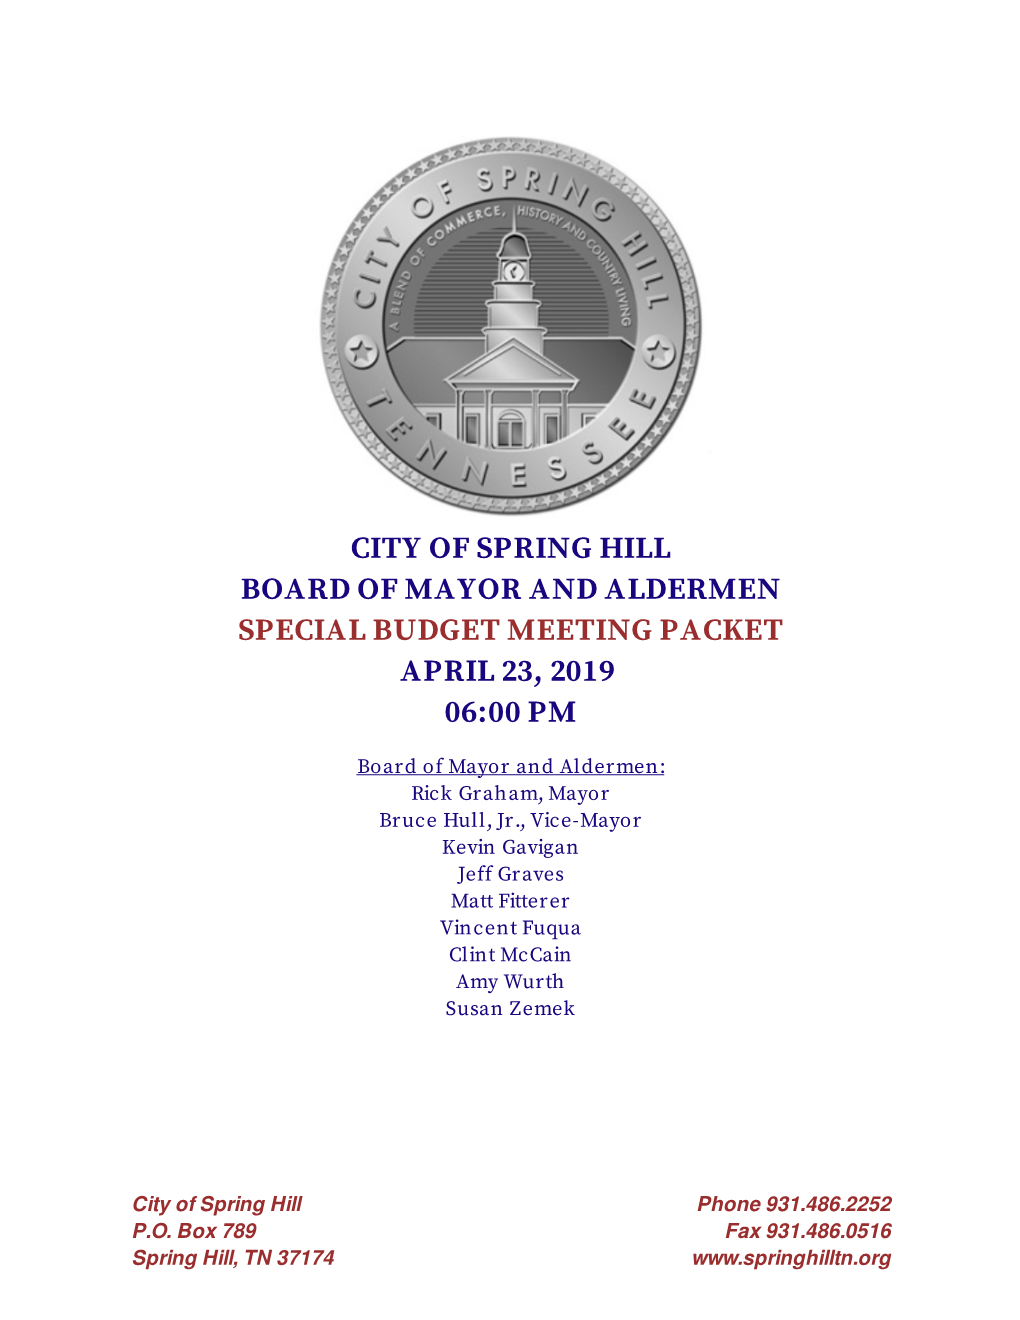 City of Spring Hill Board of Mayor and Aldermen Special Budget Meeting Packet April 23, 2019 06:00 Pm